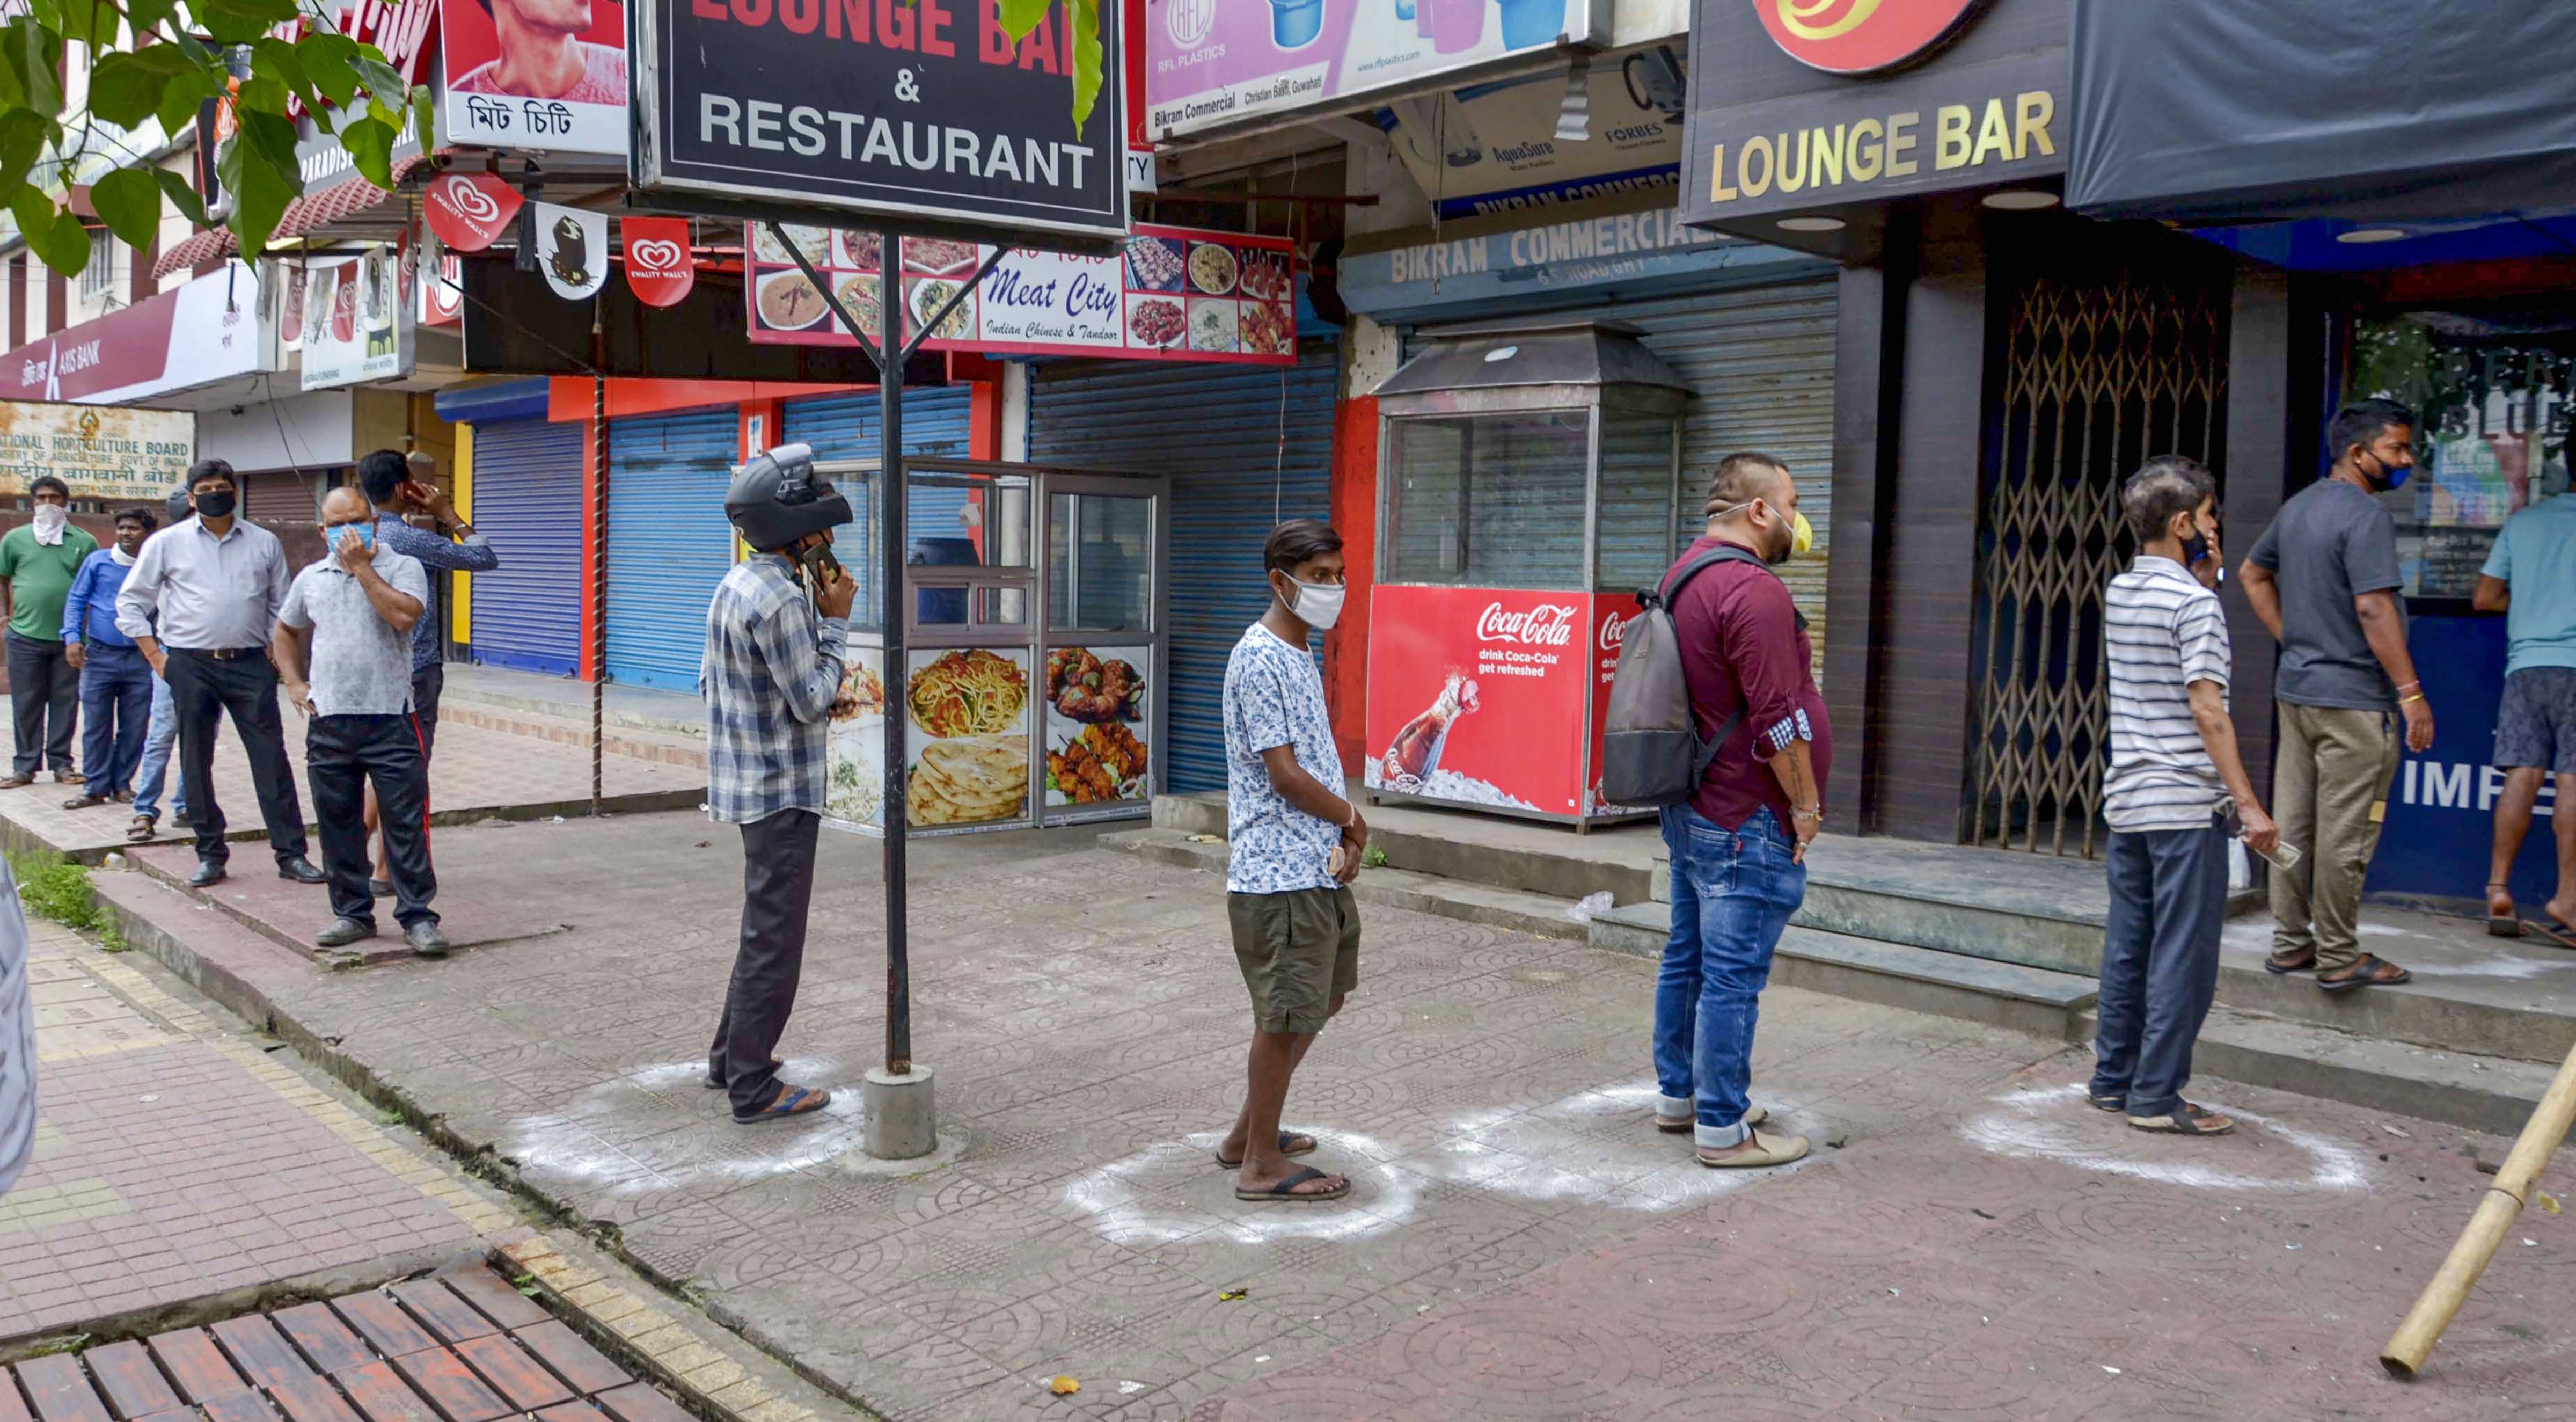 People maintain social distance as they stand in a queue to buy alcohol from a wine shop, during the ongoing Covid-19 pandemic, in Guwahati, Saturday, May 2, 2020.